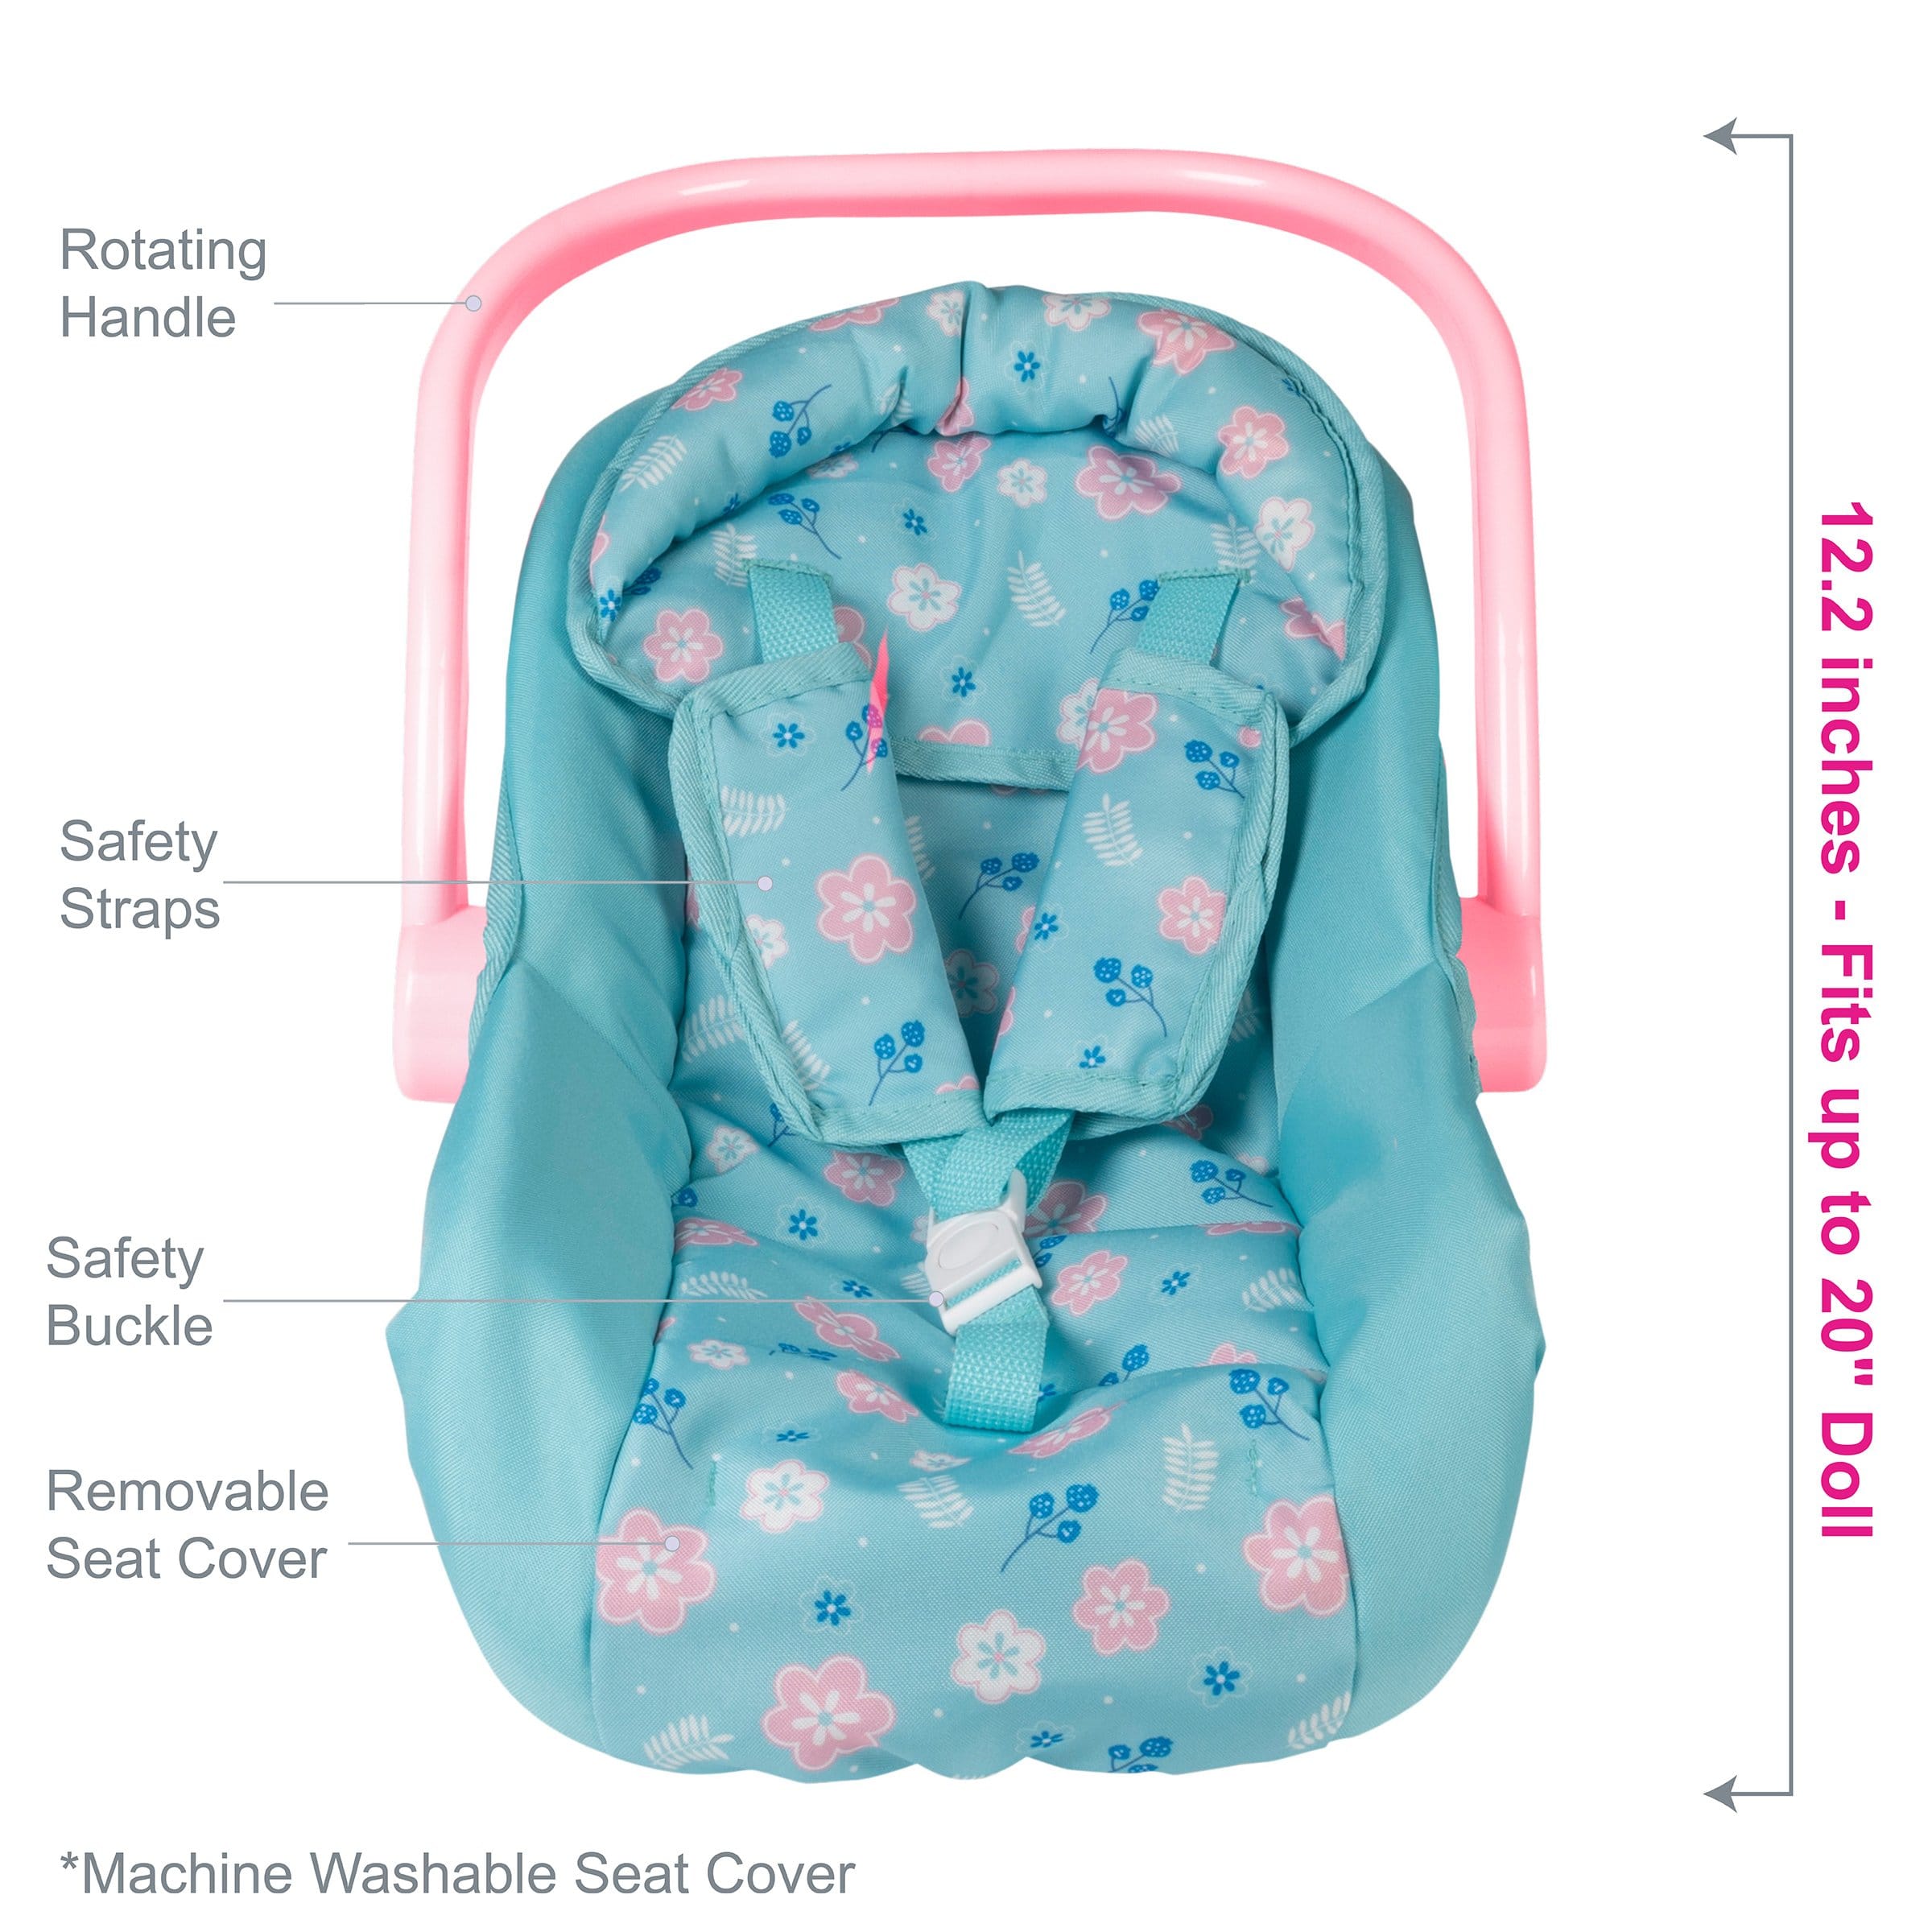 Adora Baby Doll Car Seat Carrier in Pink Floral Print - Adora